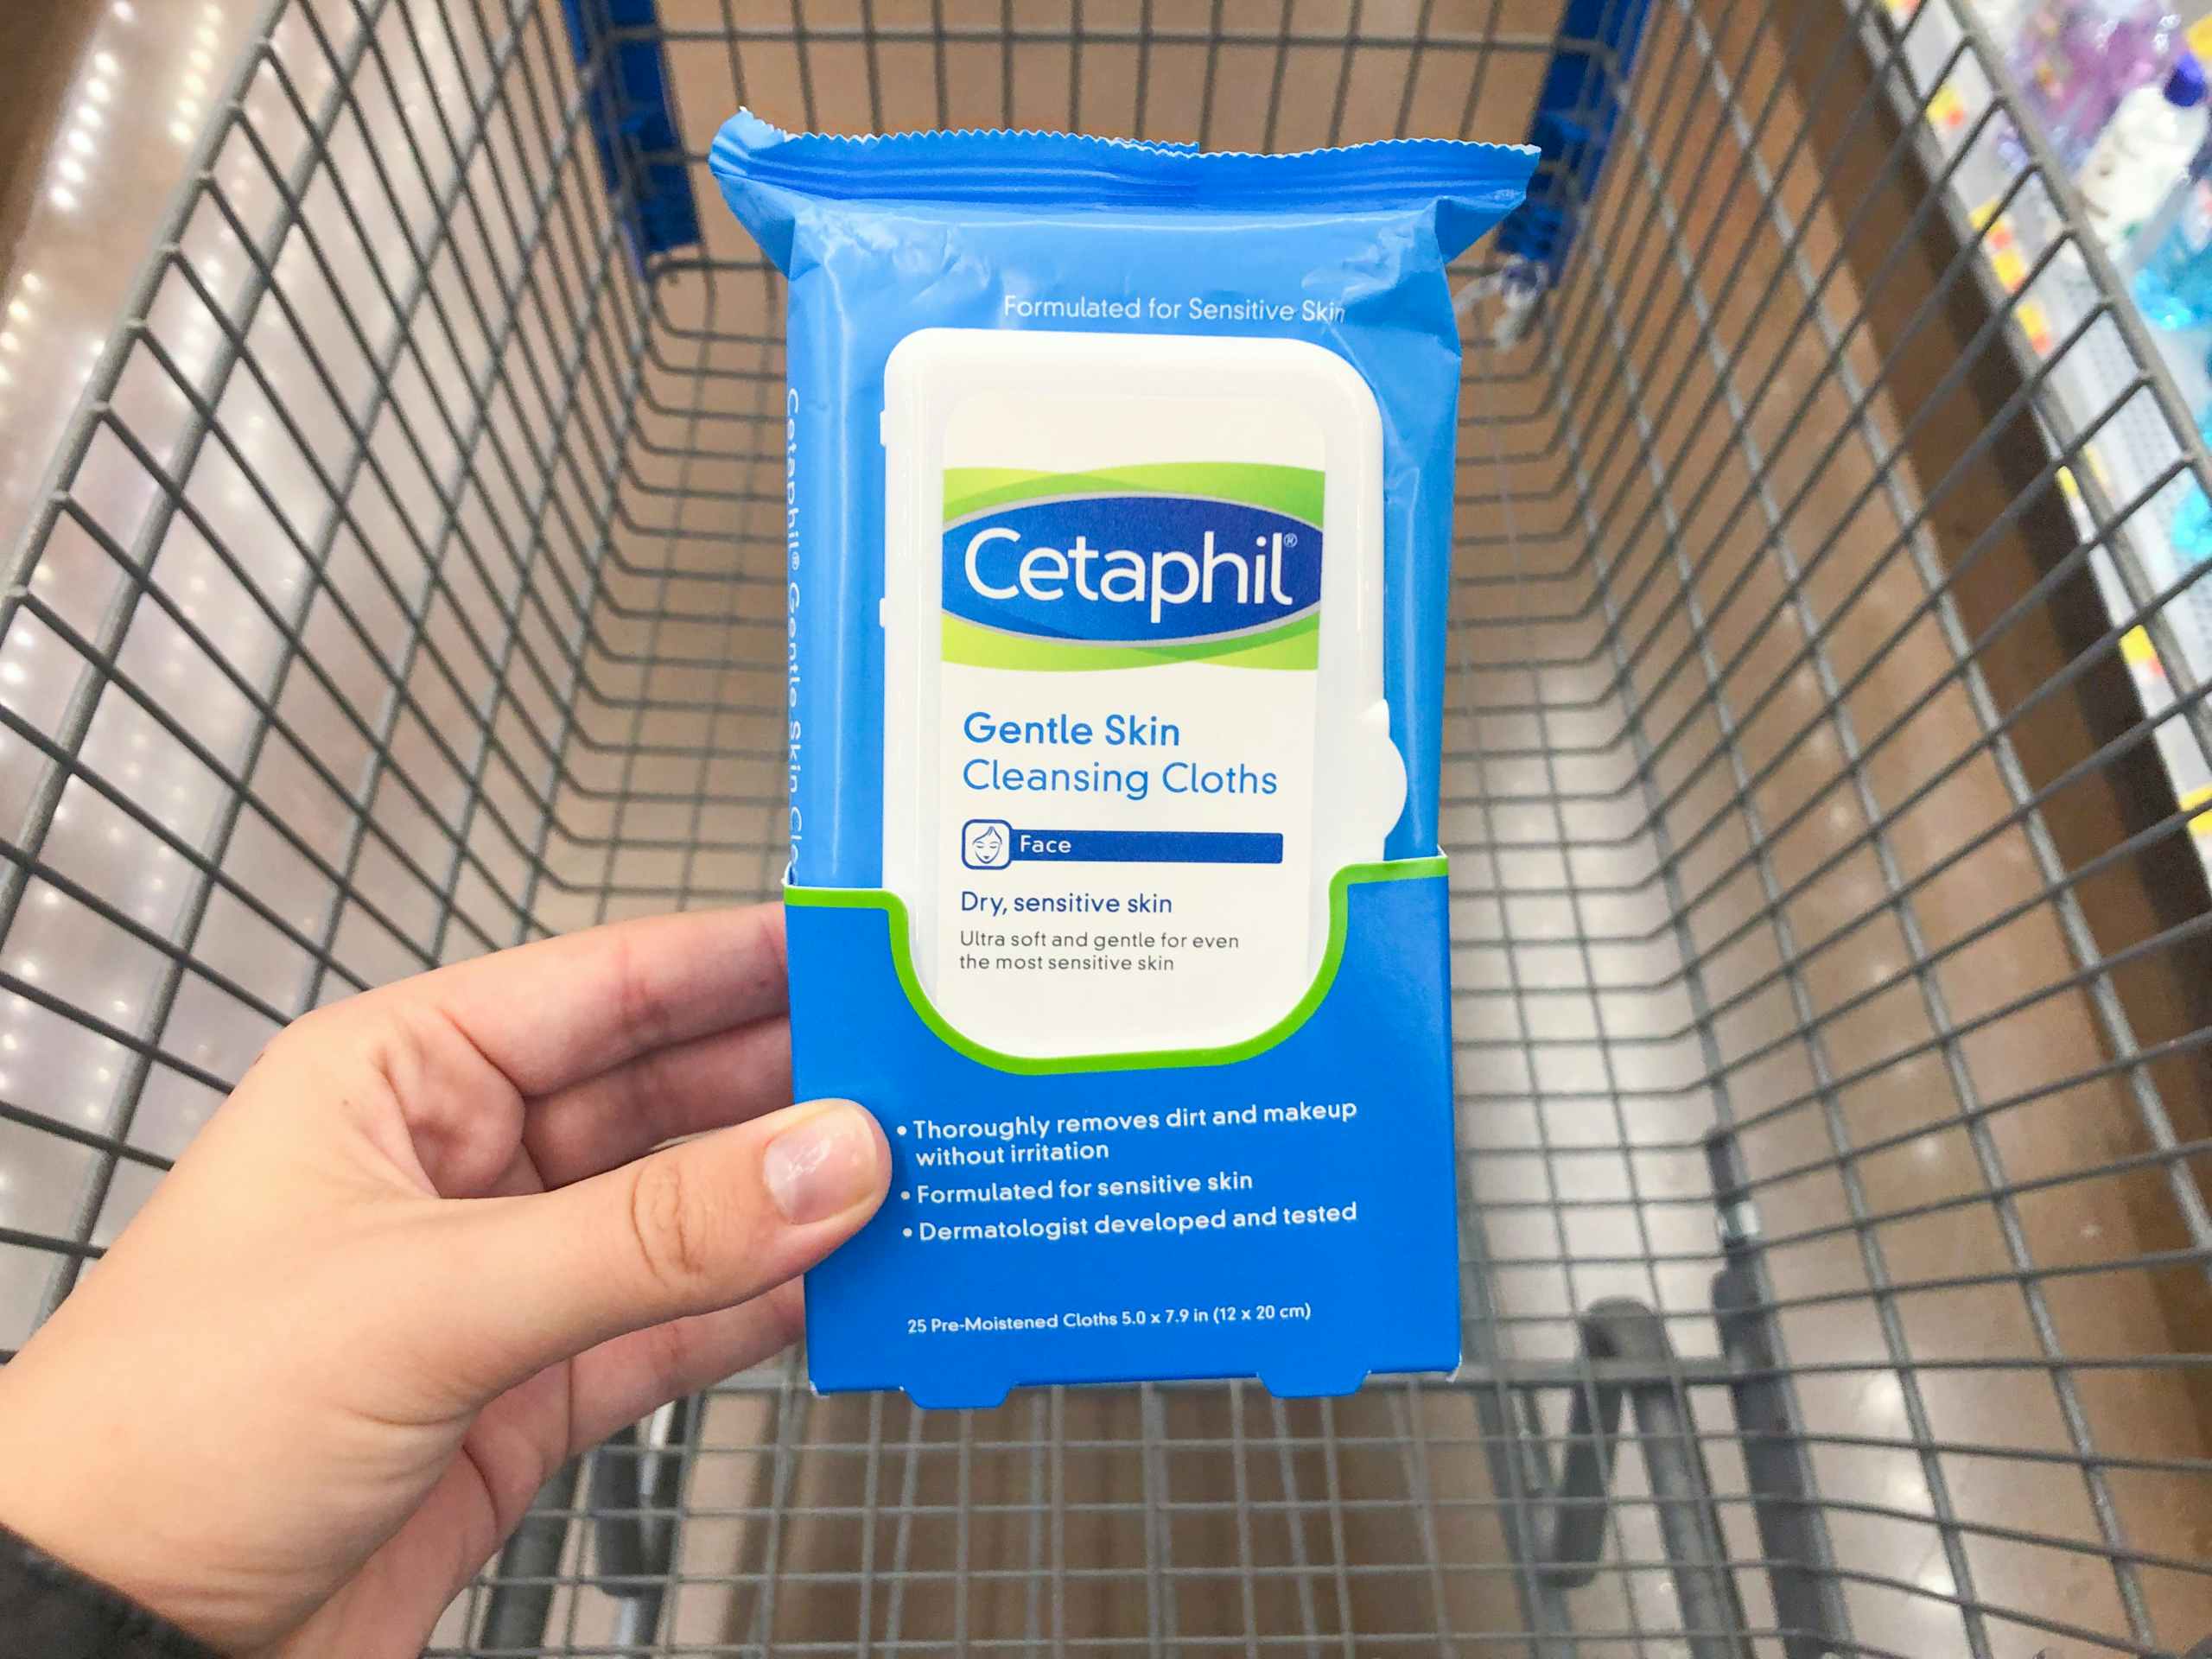 hand holding Cetaphil wipes over the top of Walmart shopping cart